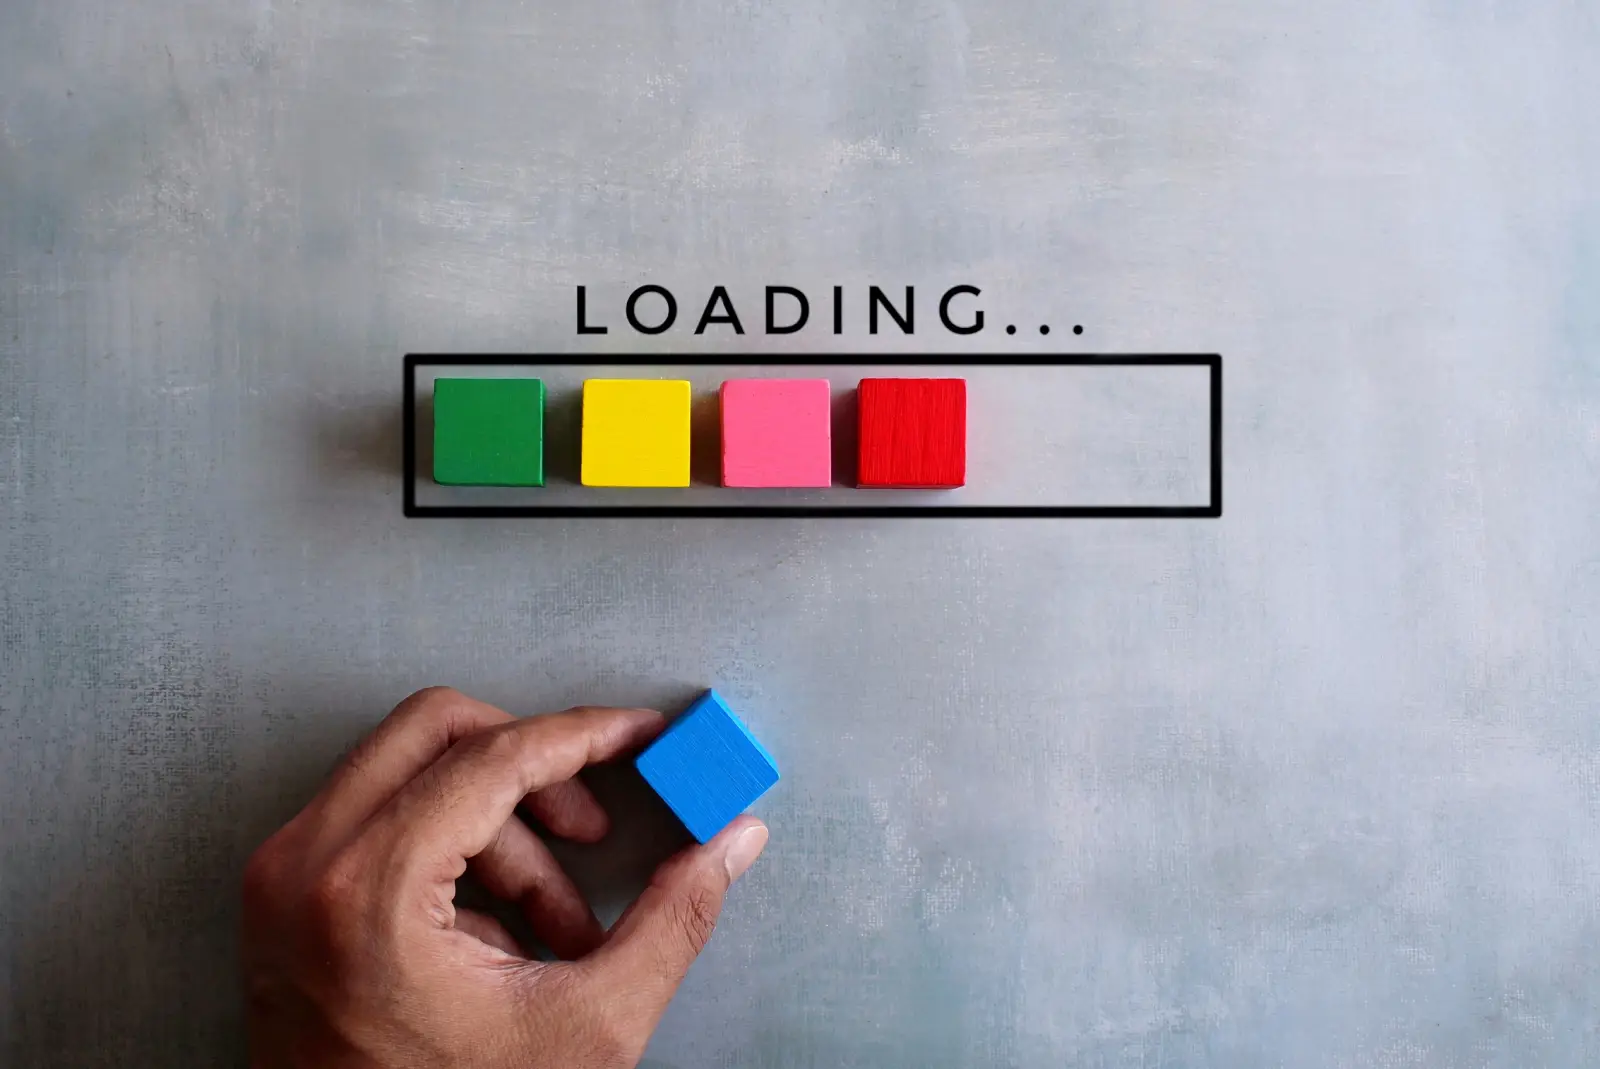 A person's hand placing a blue cube alongside other colorful cubes arranged to resemble a loading bar that spells out "loading..." against a gray background.